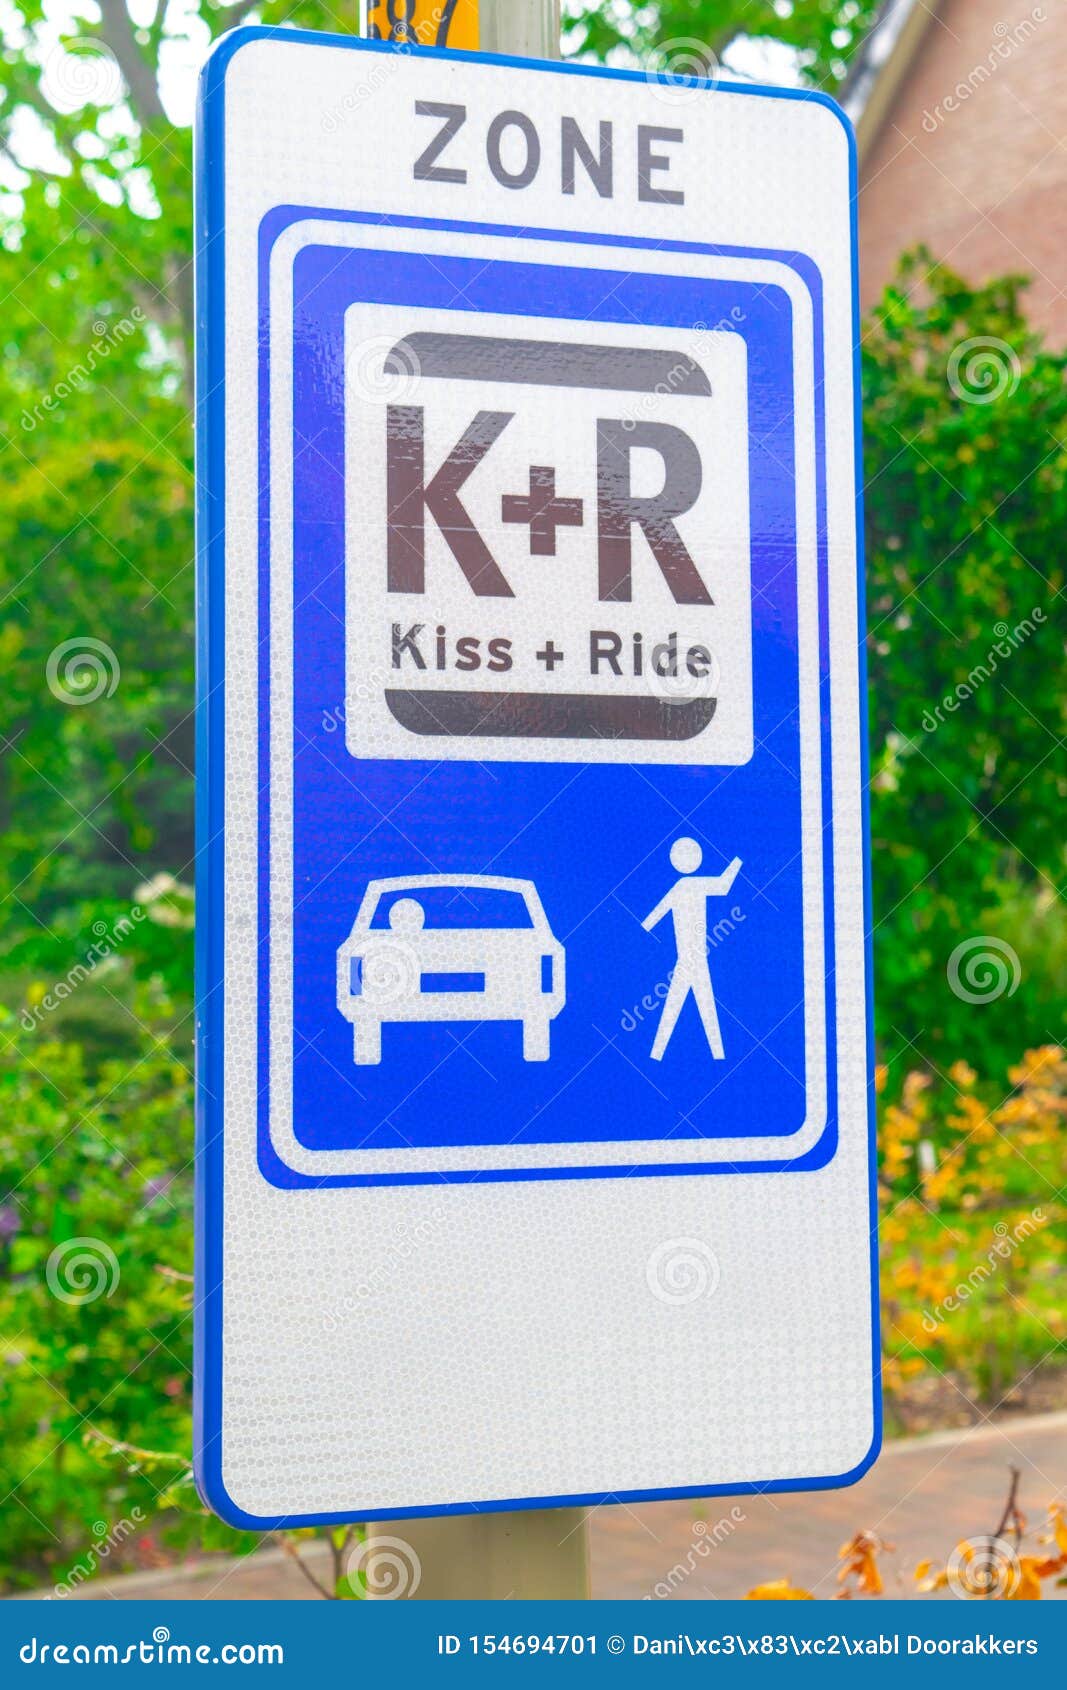 Dutch road sign kiss and ride. Dutch road sign: kiss and ride zone, you can quickly park the car here to drop off or pick up someone